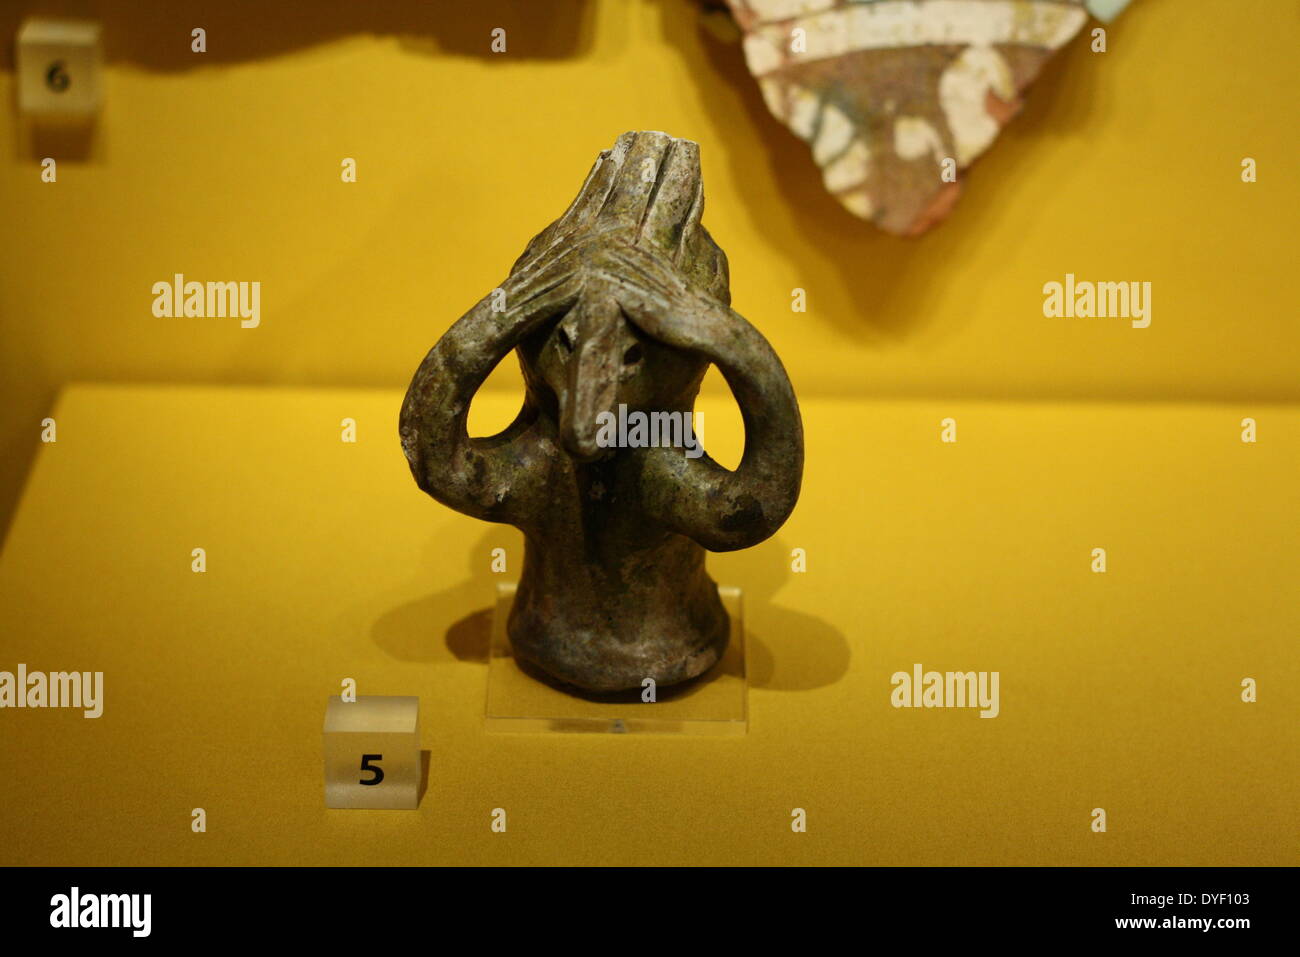 Roof adornment (finial) made from fired clay. Circa 13th-14th century. The figure is in the form of an imaginary animal. Stock Photo